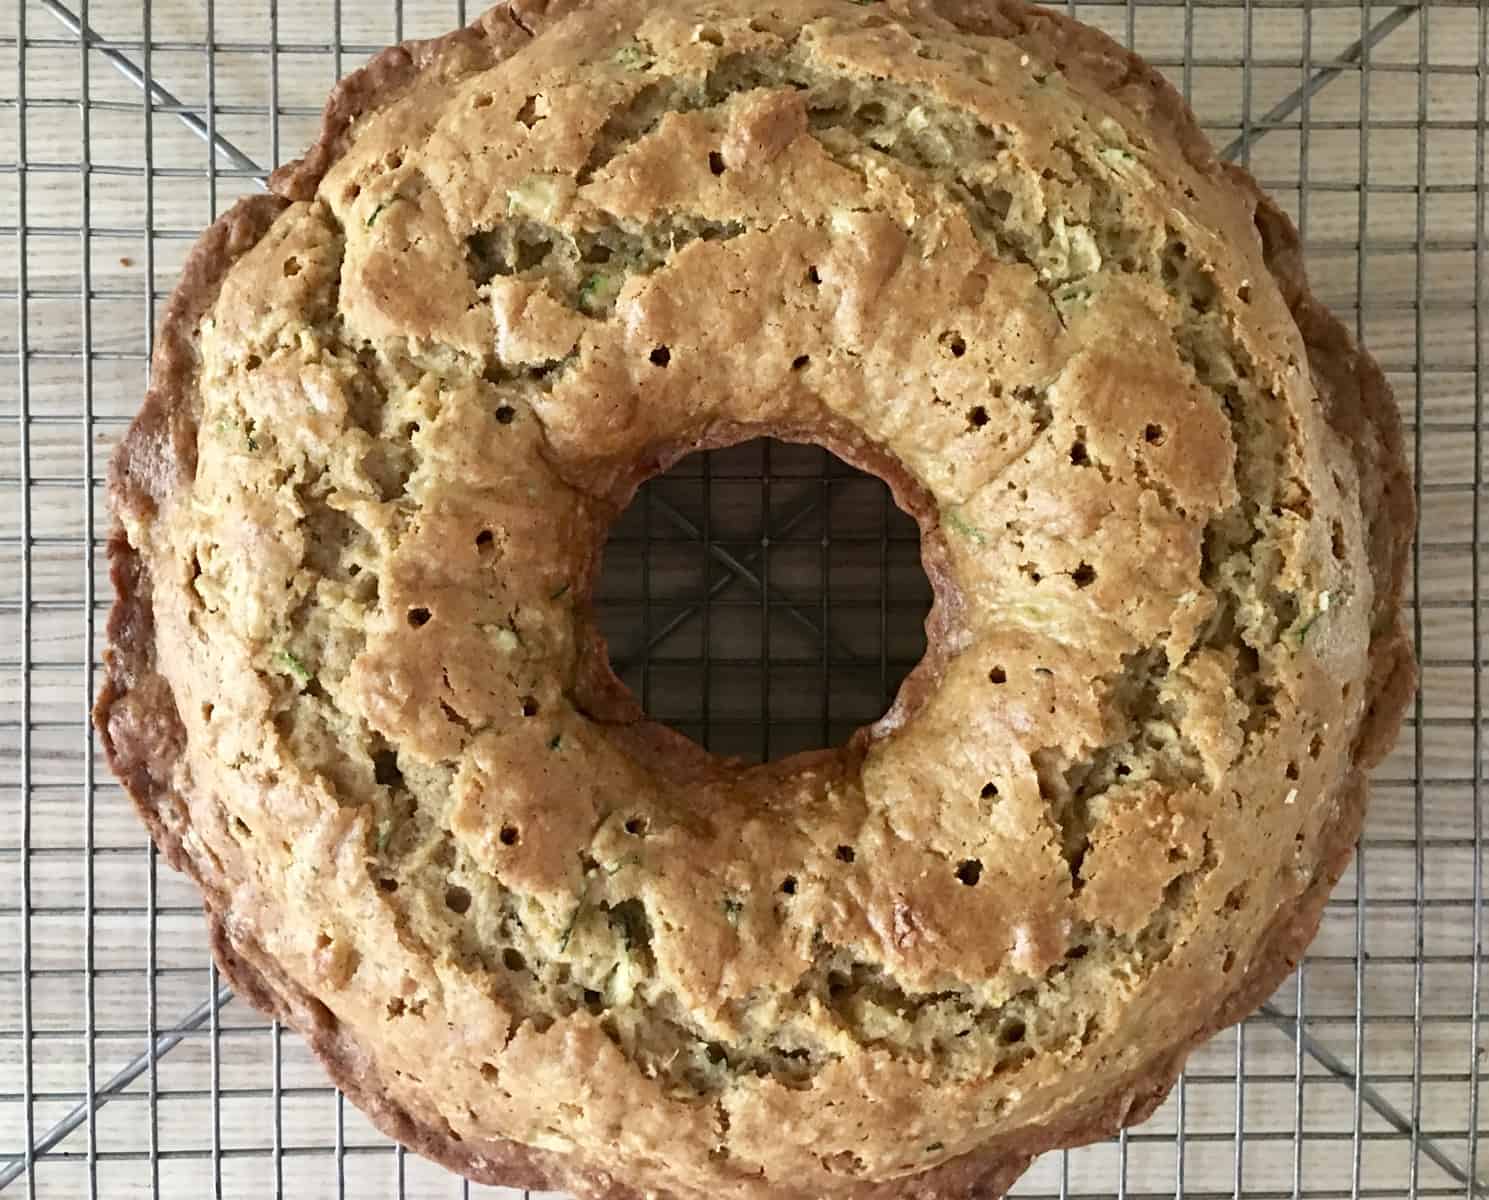 holes poked into top of cooled pineapple zucchini Bundt Cake. 